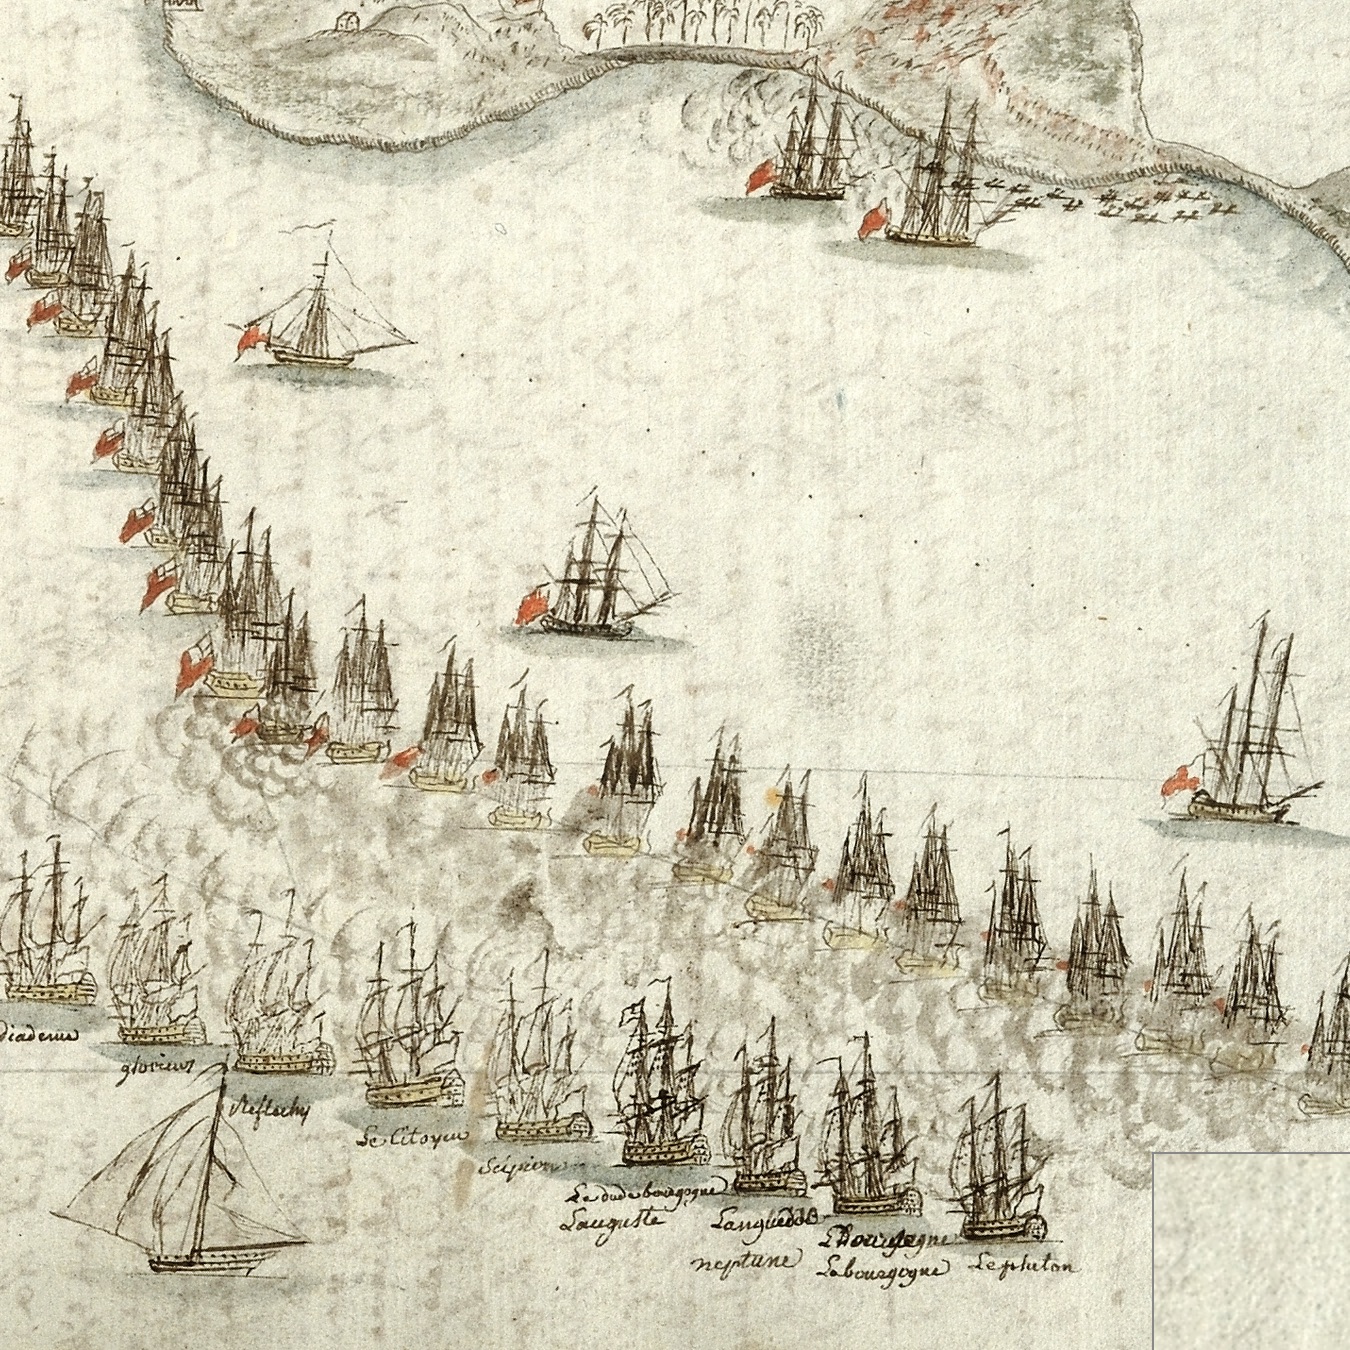 This watercolor of a naval battle illustrates the importance of naval power in the global arms race.